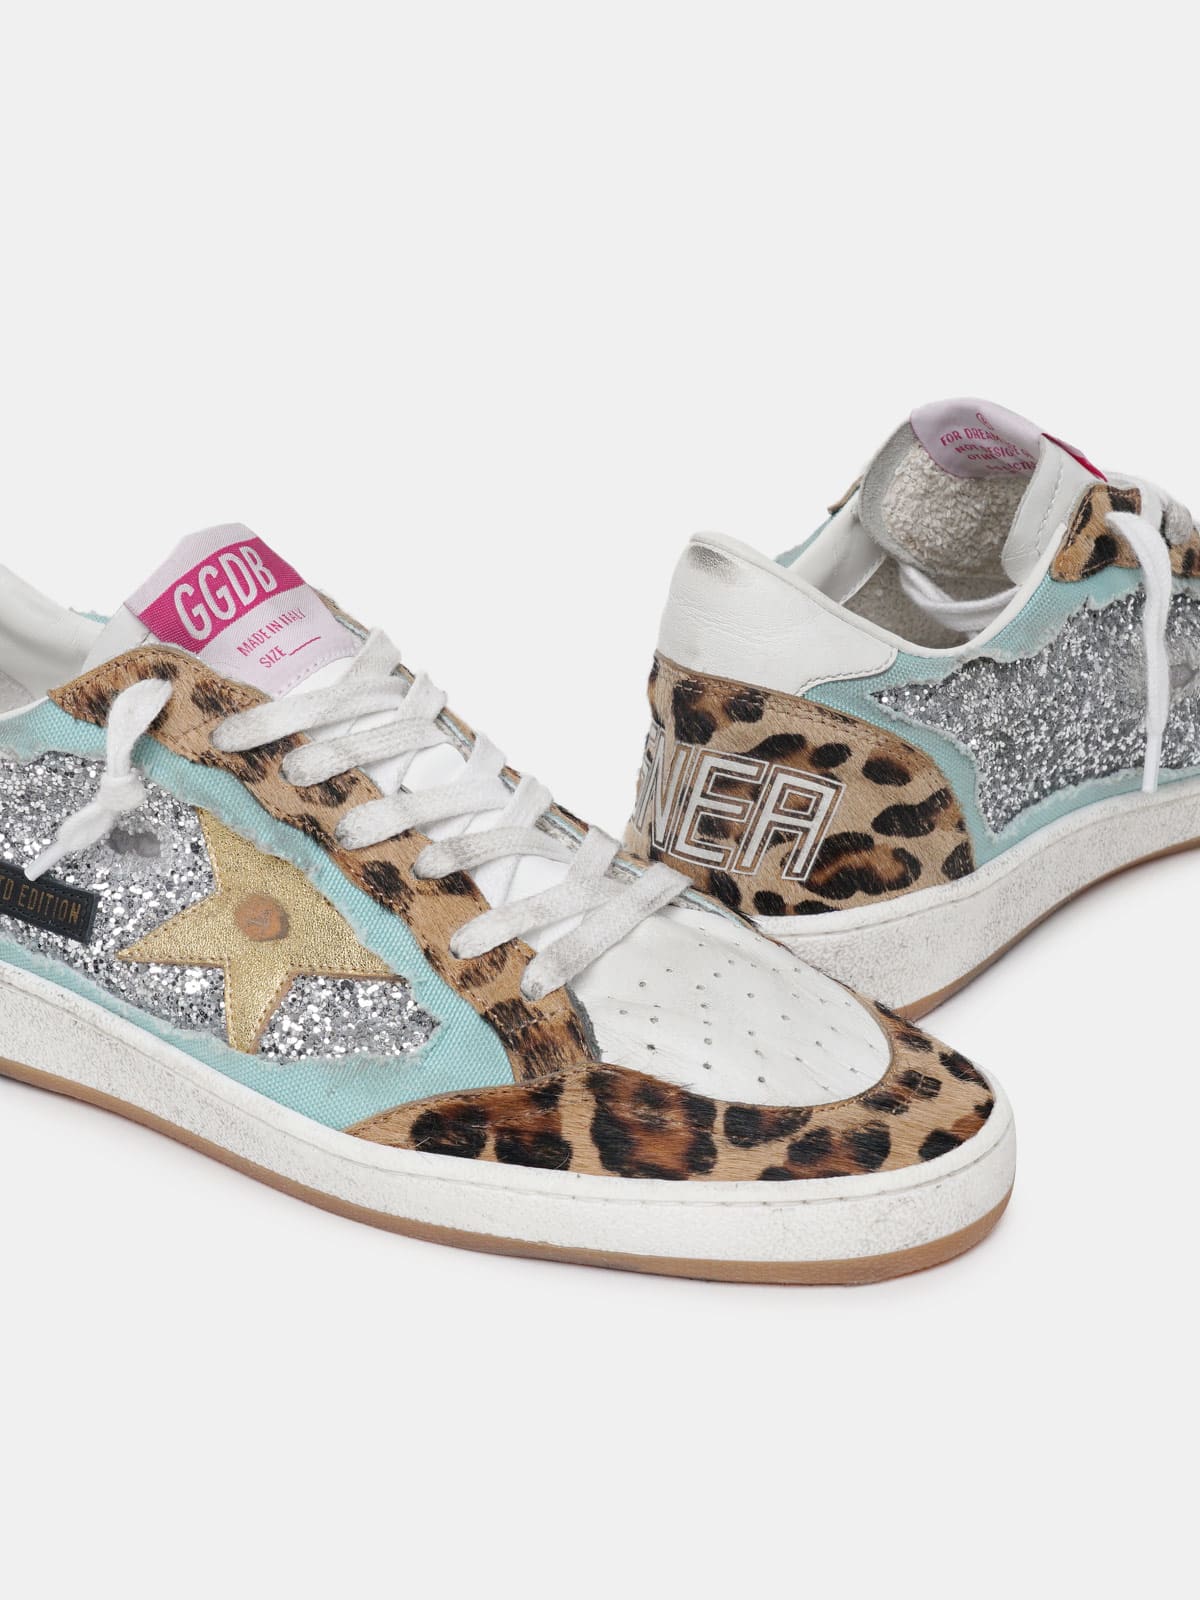 LTD Ball Star sneakers with silver glitter and leopard-print pony skin |  Golden Goose